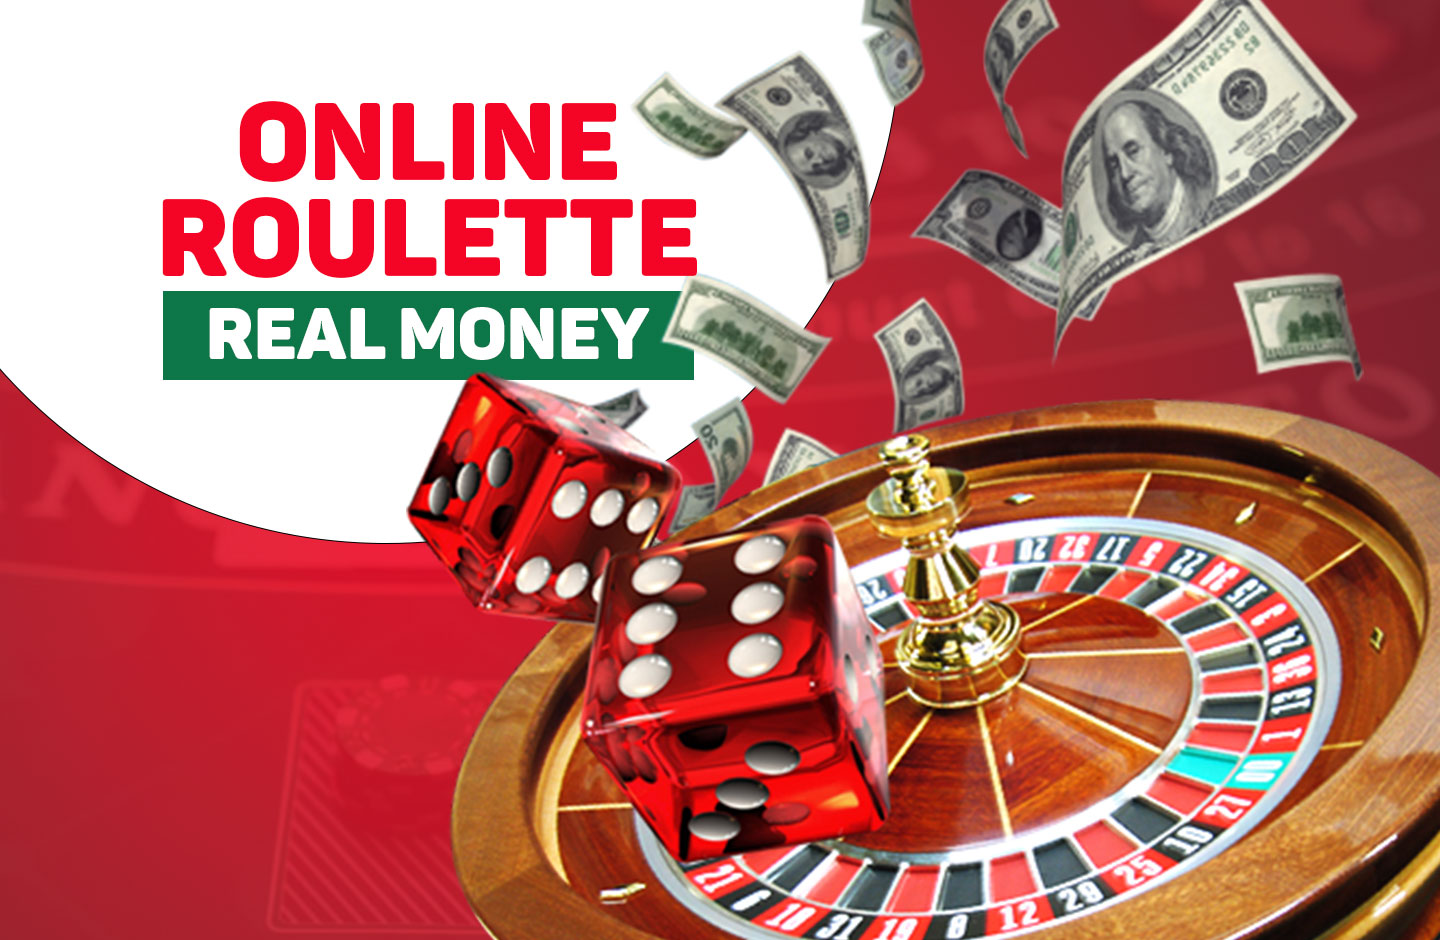 Short Story: The Truth About online casinos